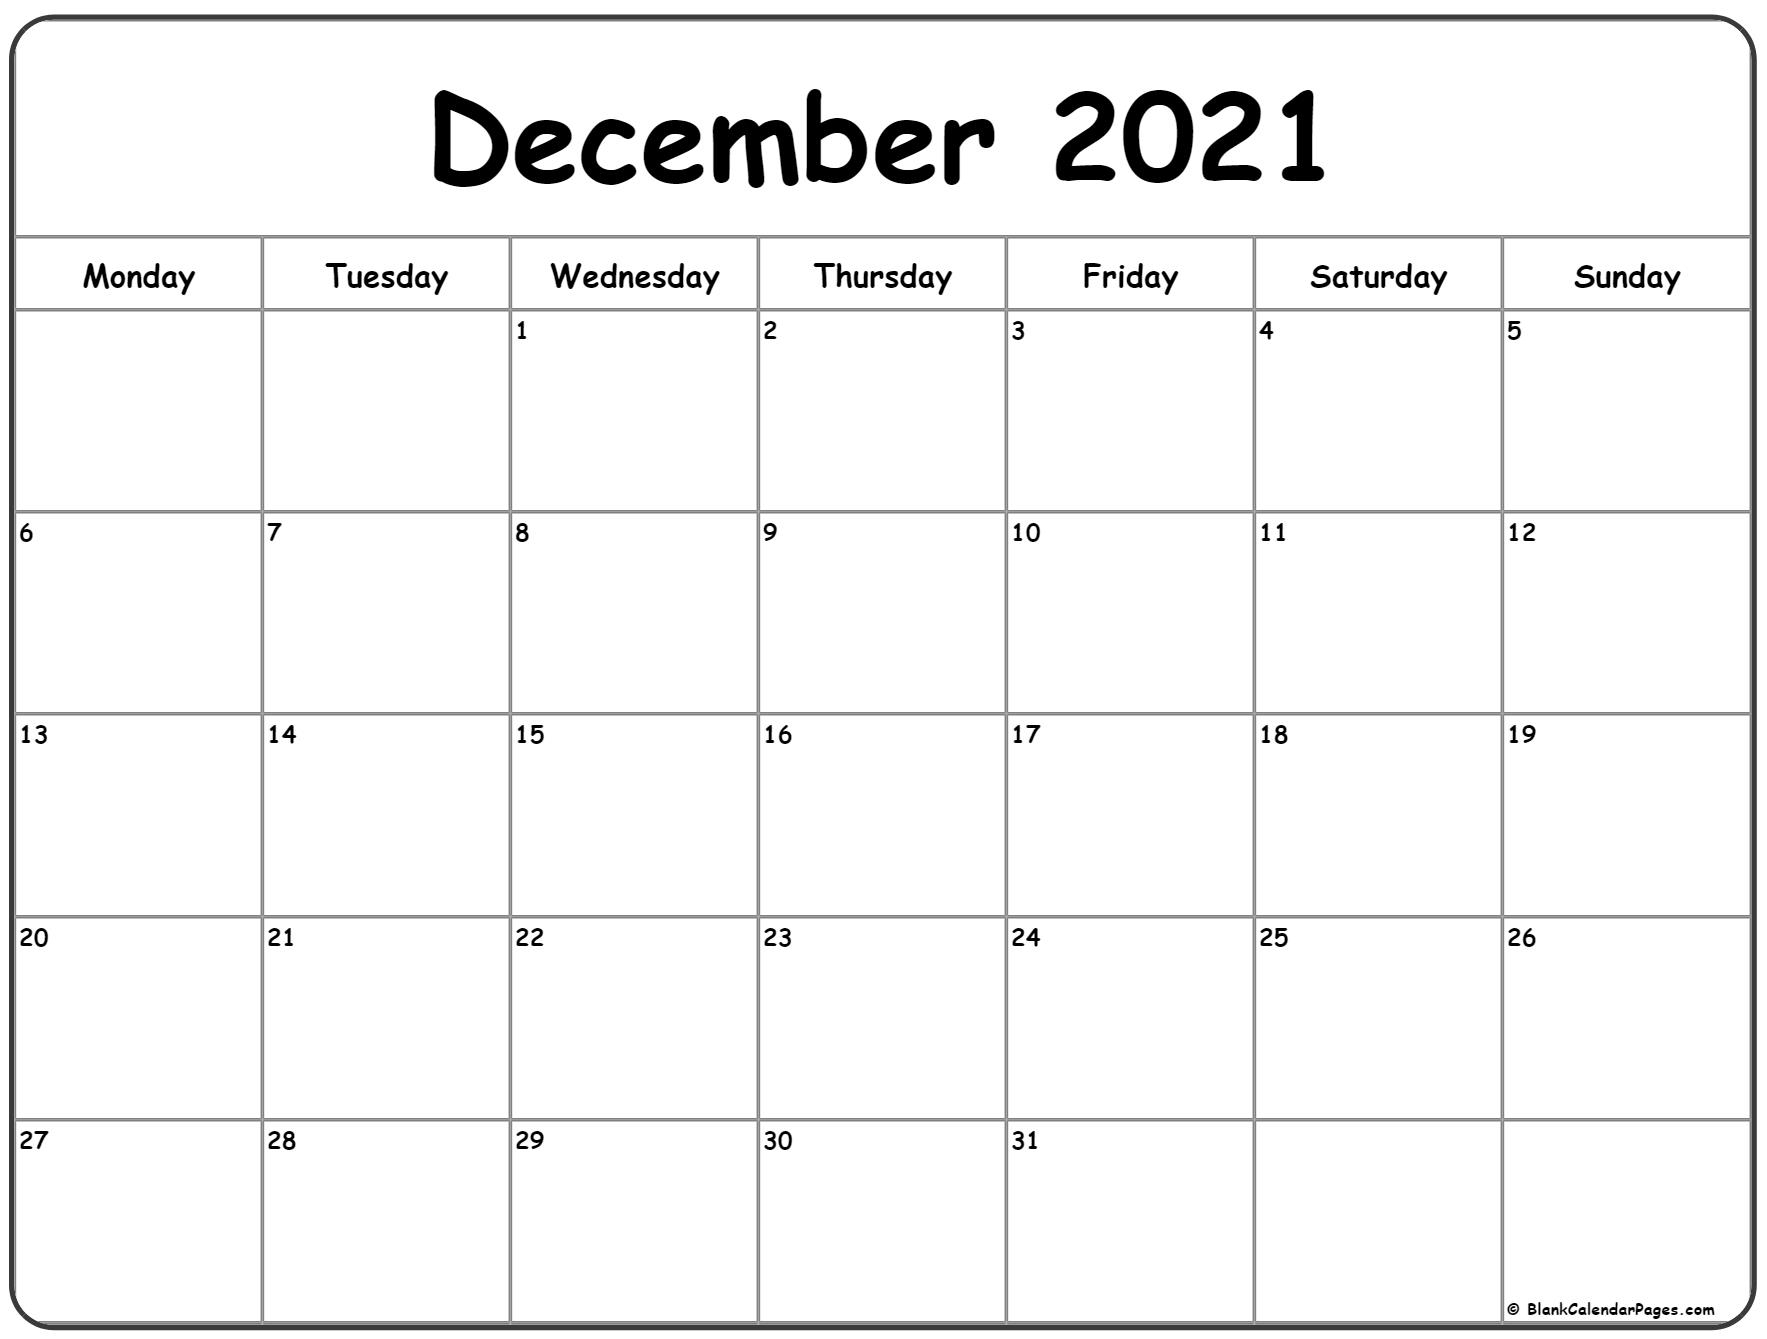 Collect Decembers Calender For 2021